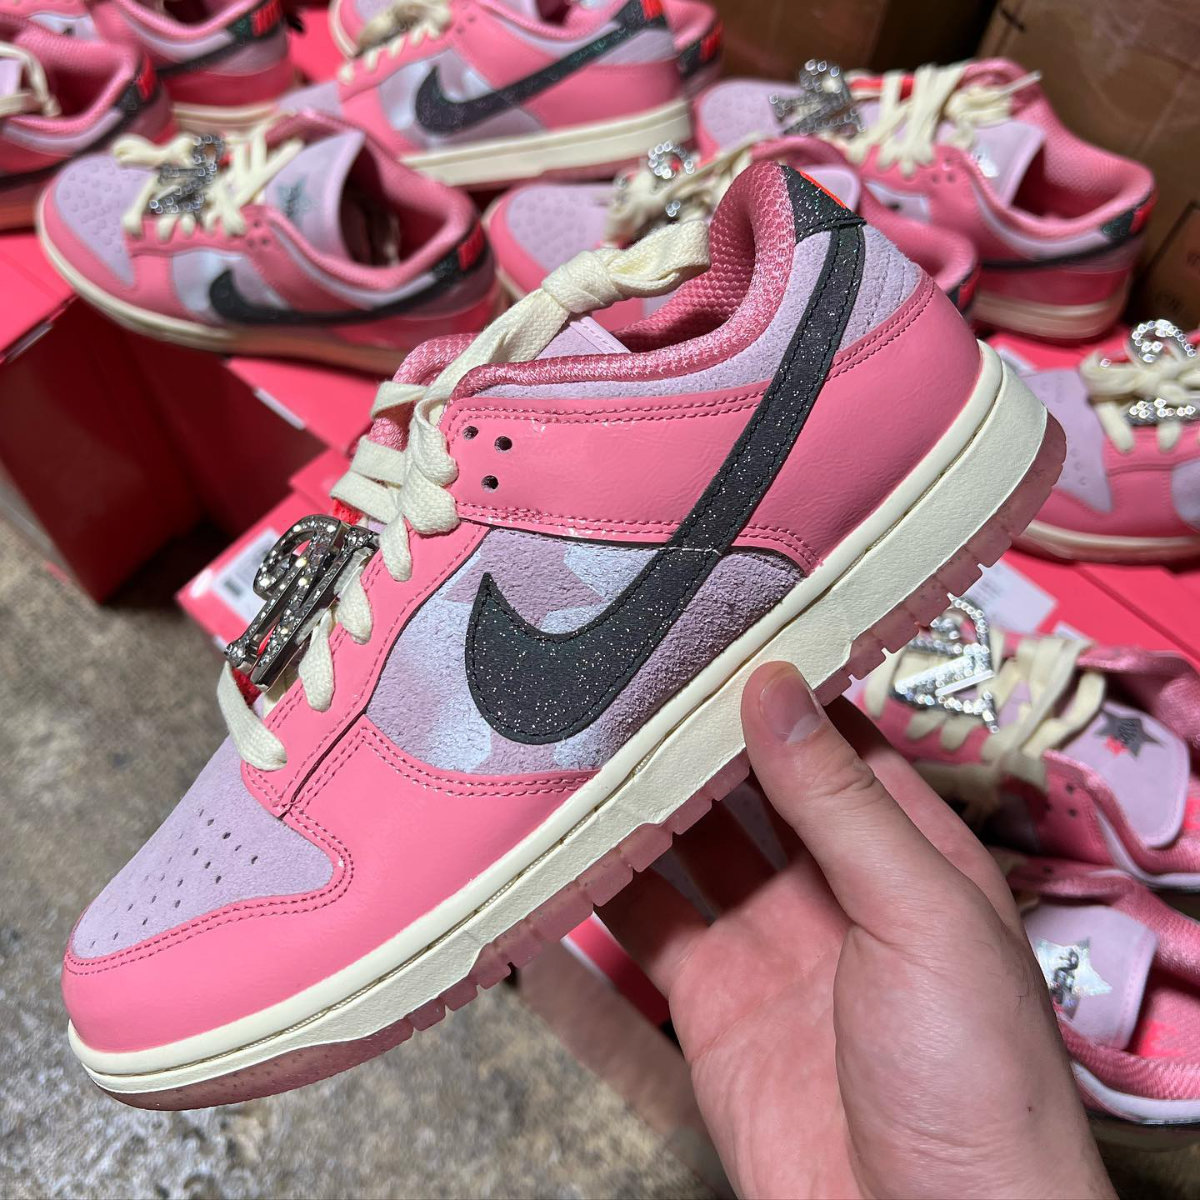 Barbie Fever Over? Nike's Pink Glittery Dunk Says Otherwise